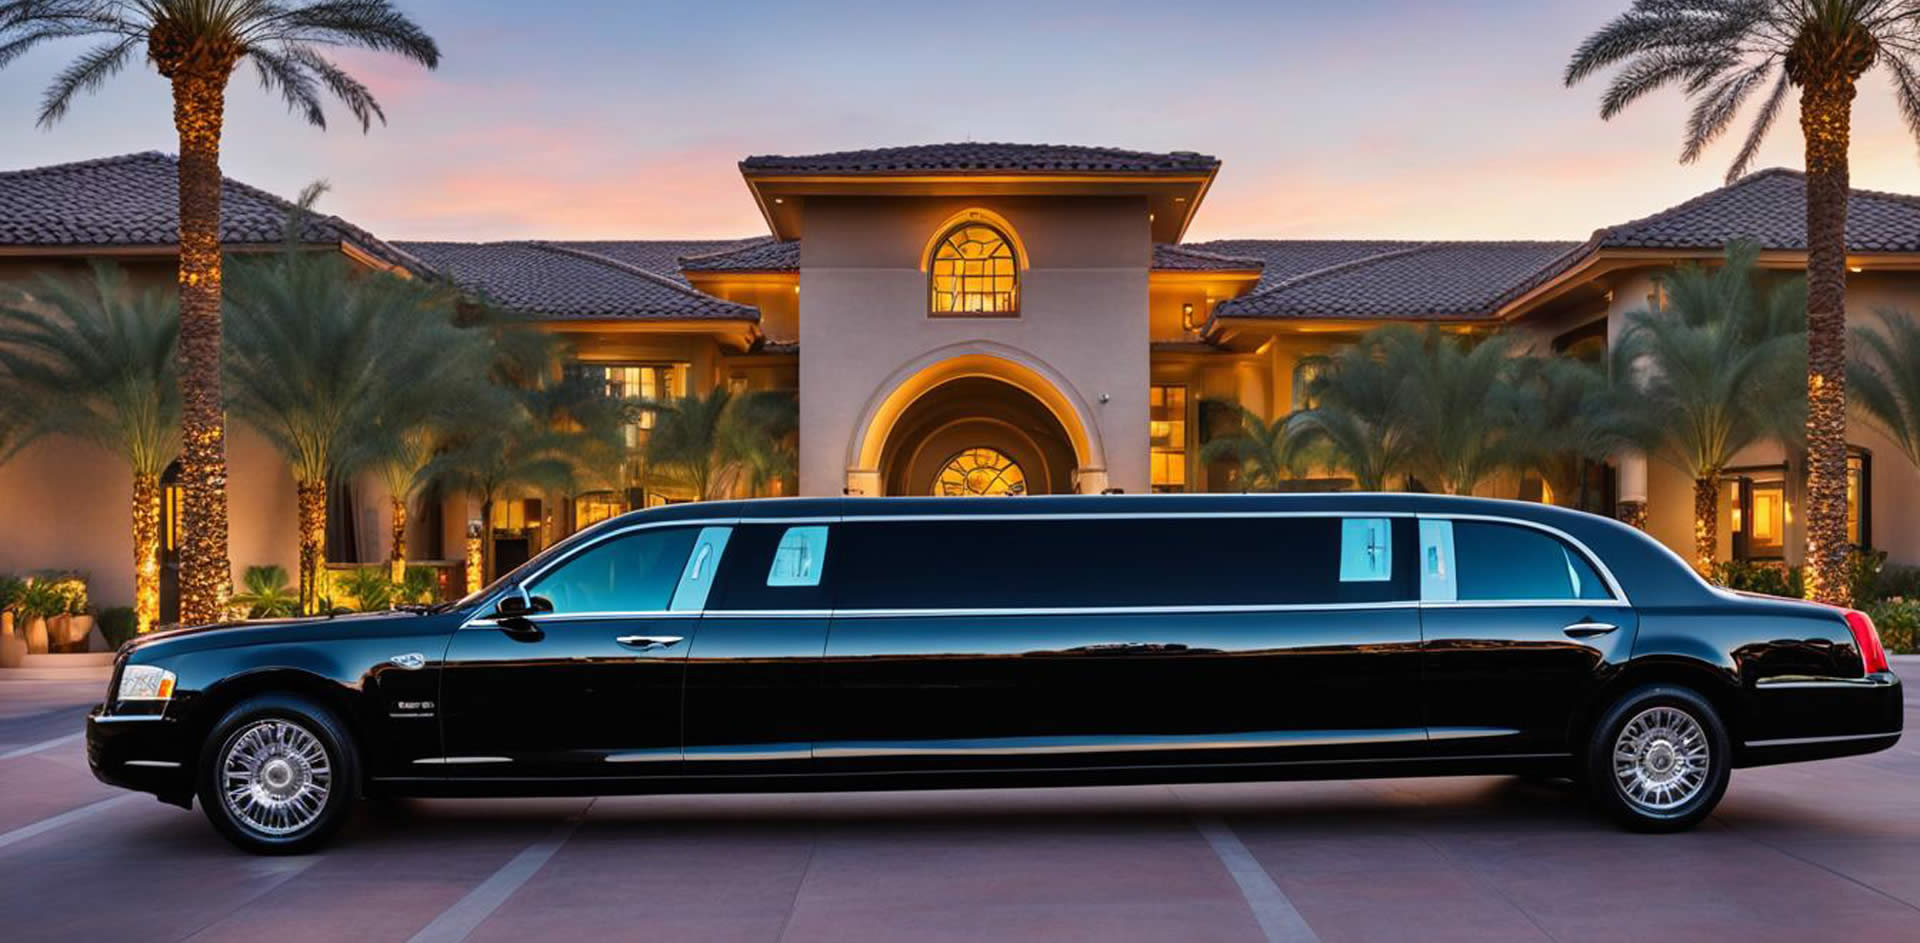 Limo Service in Glendale